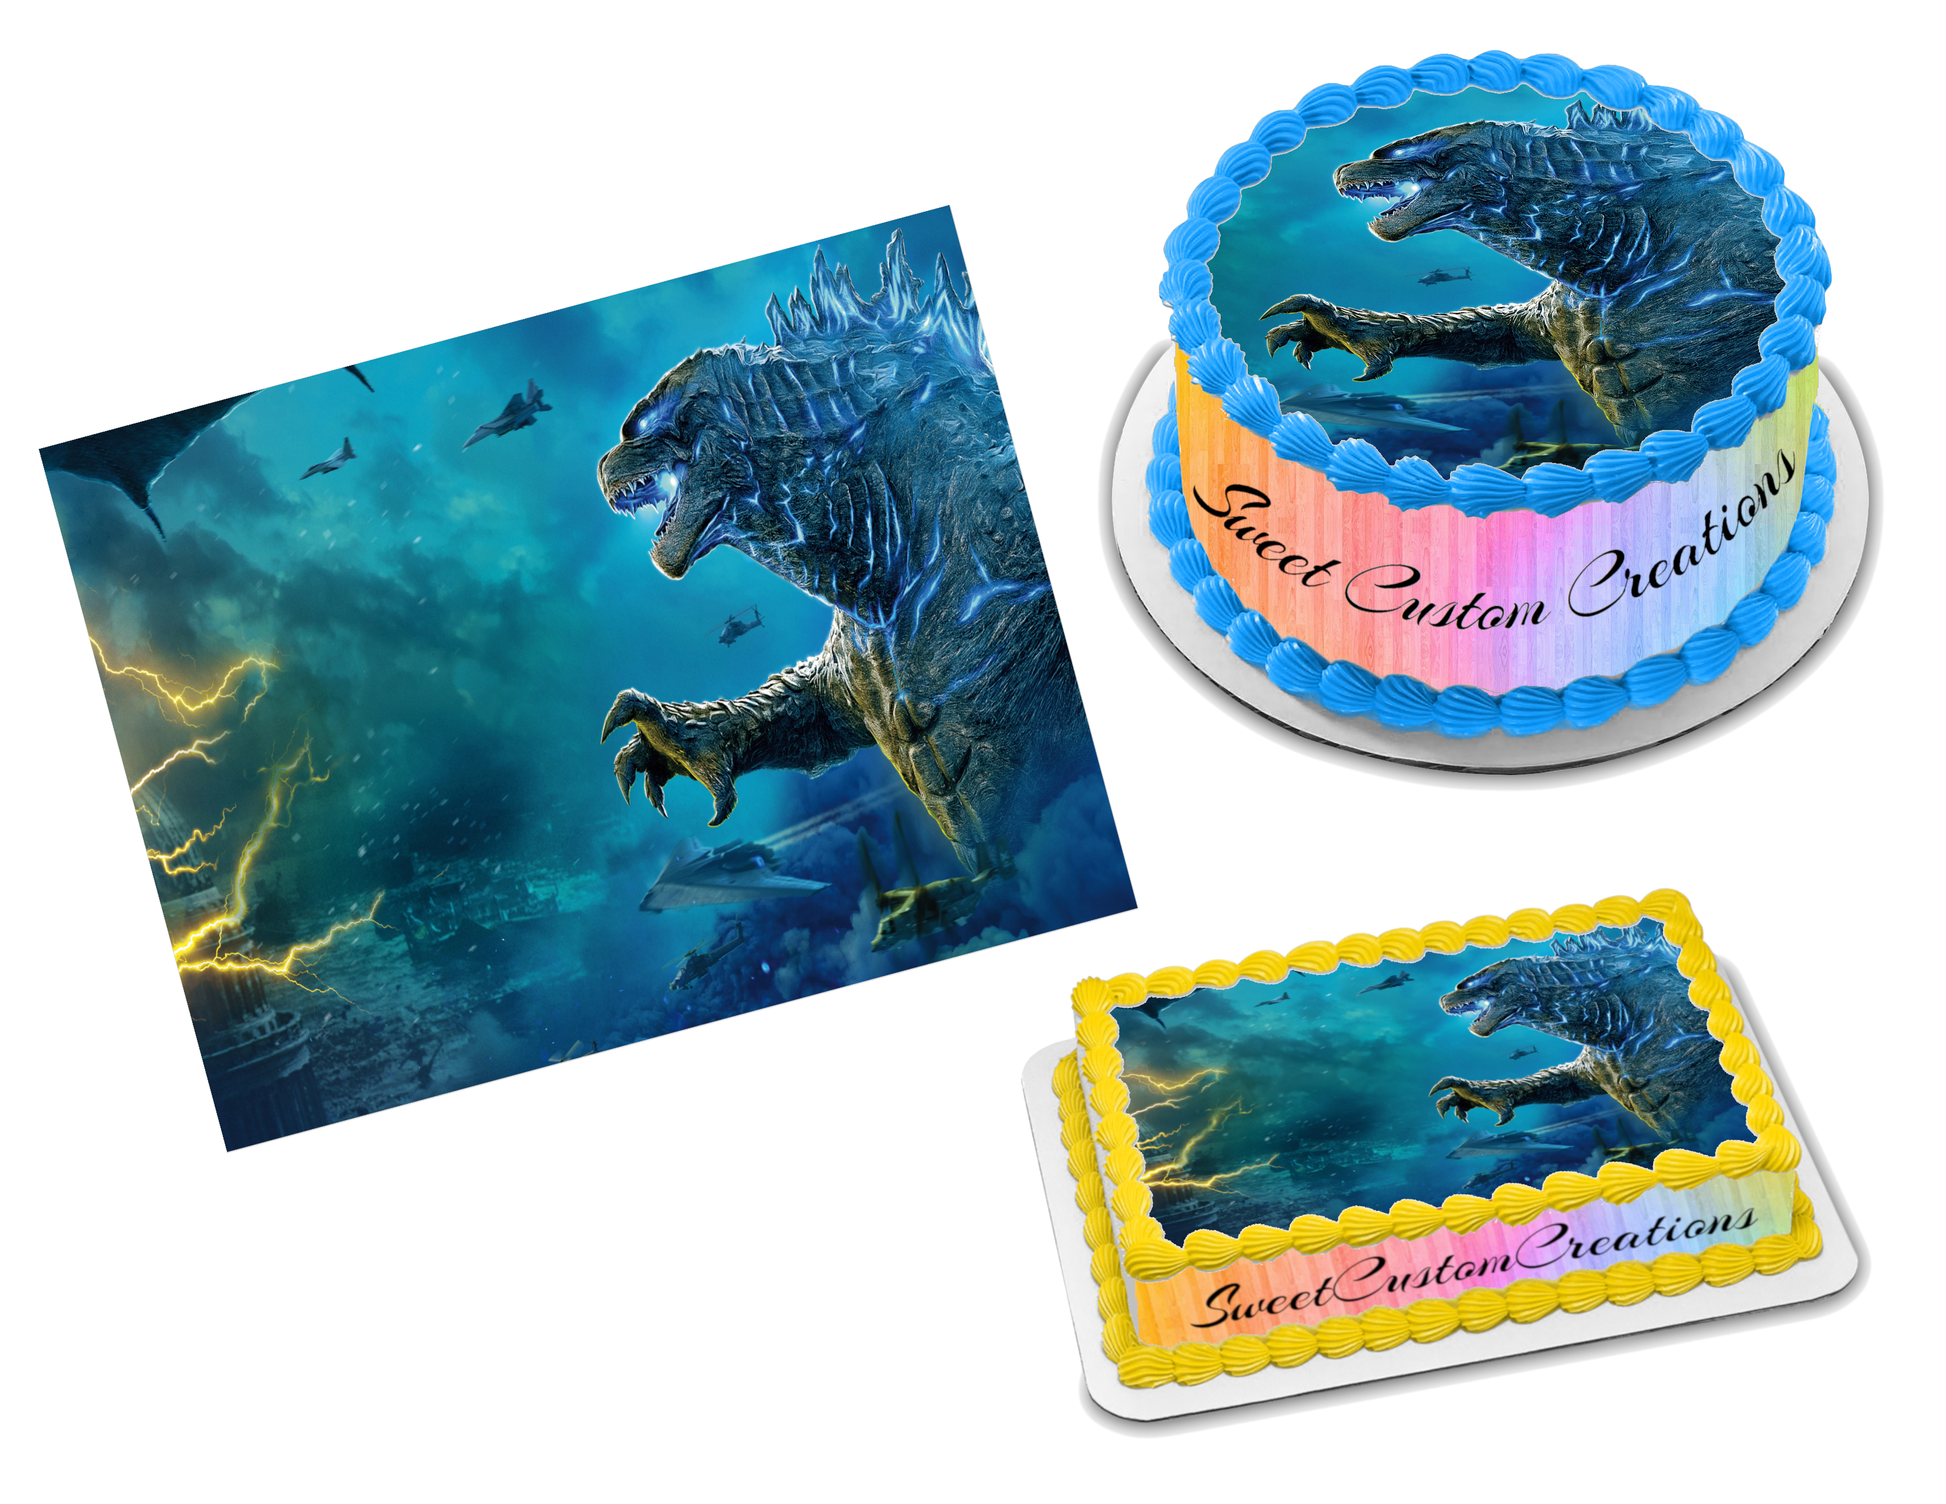 Godzilla King of the Monsters Edible Image Frosting Sheet #5 Topper (70+ sizes)